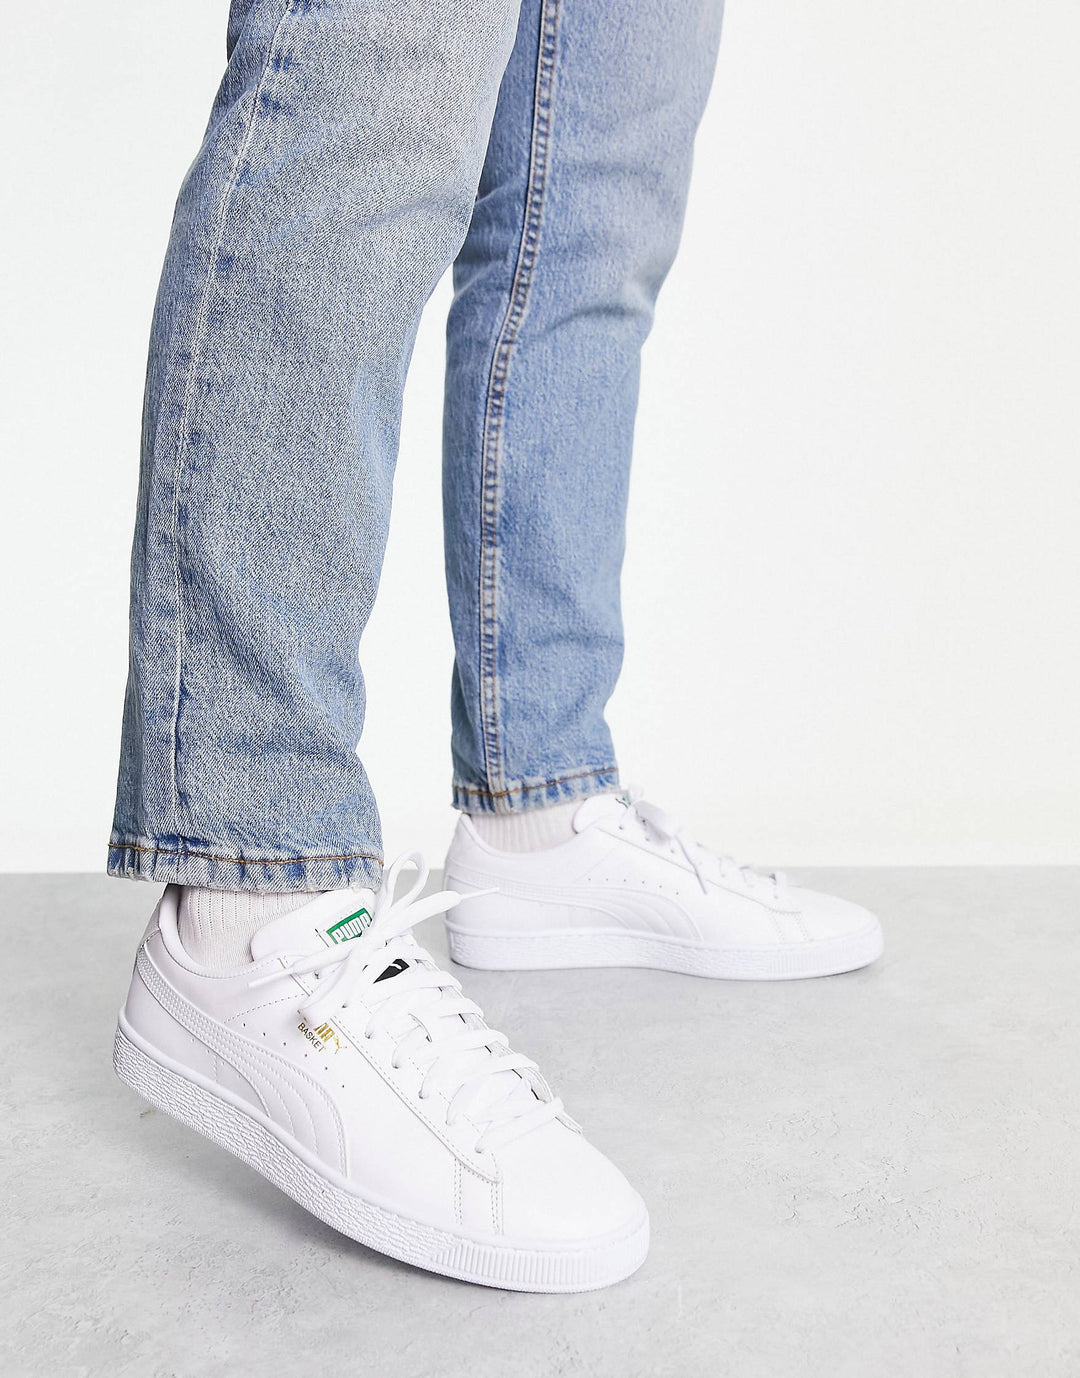 Puma basket class trainers in all white